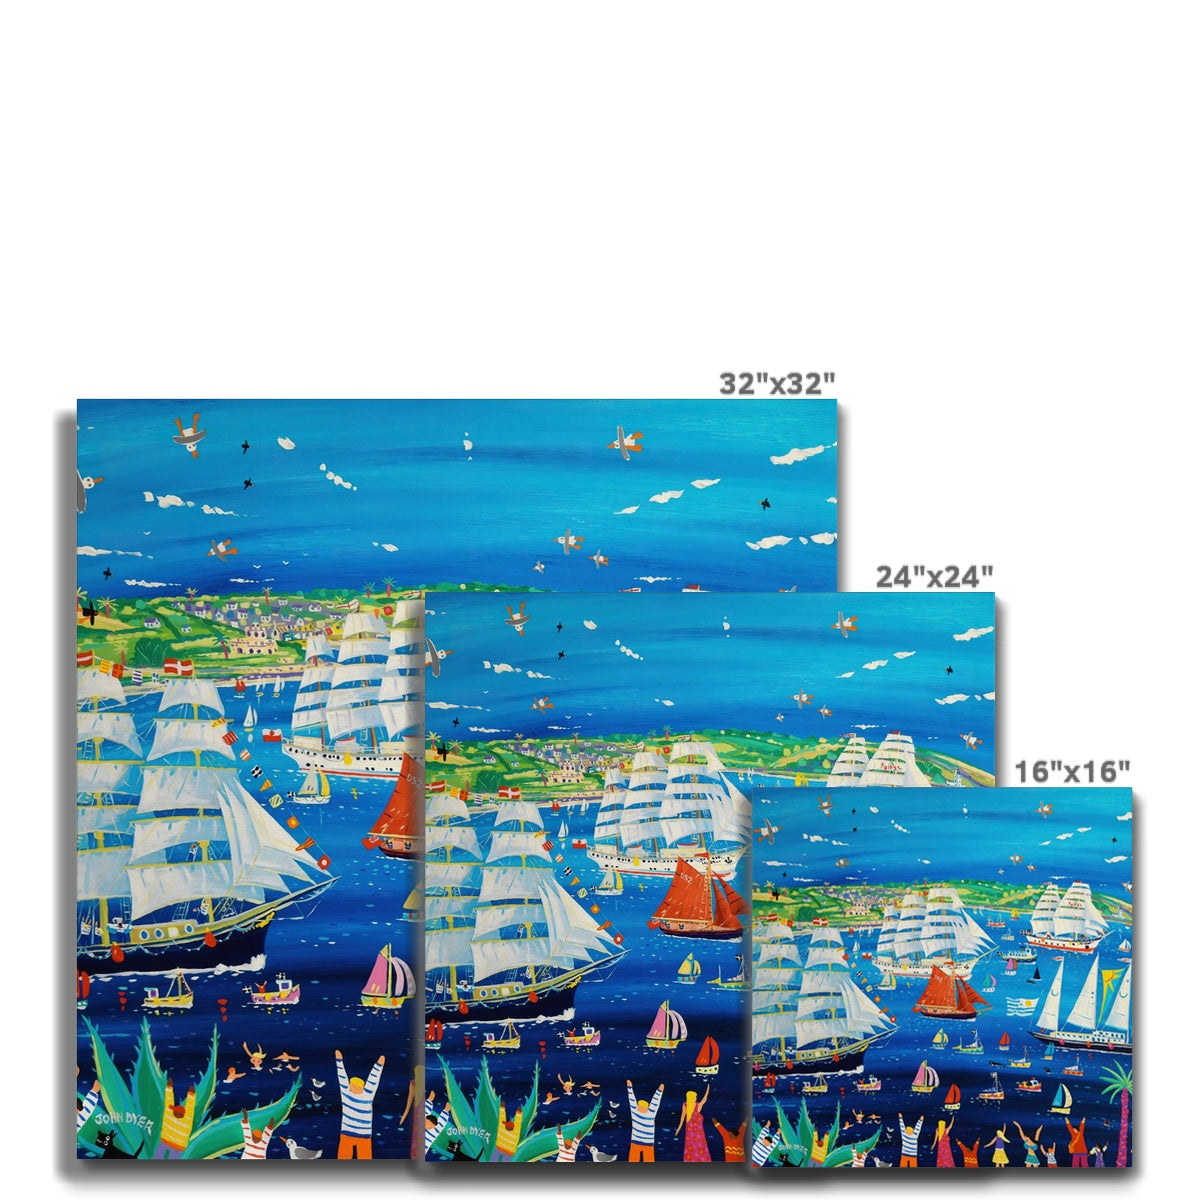 The Official Canvas Art Print for the Falmouth Tall Ships Races 2023 by John Dyer